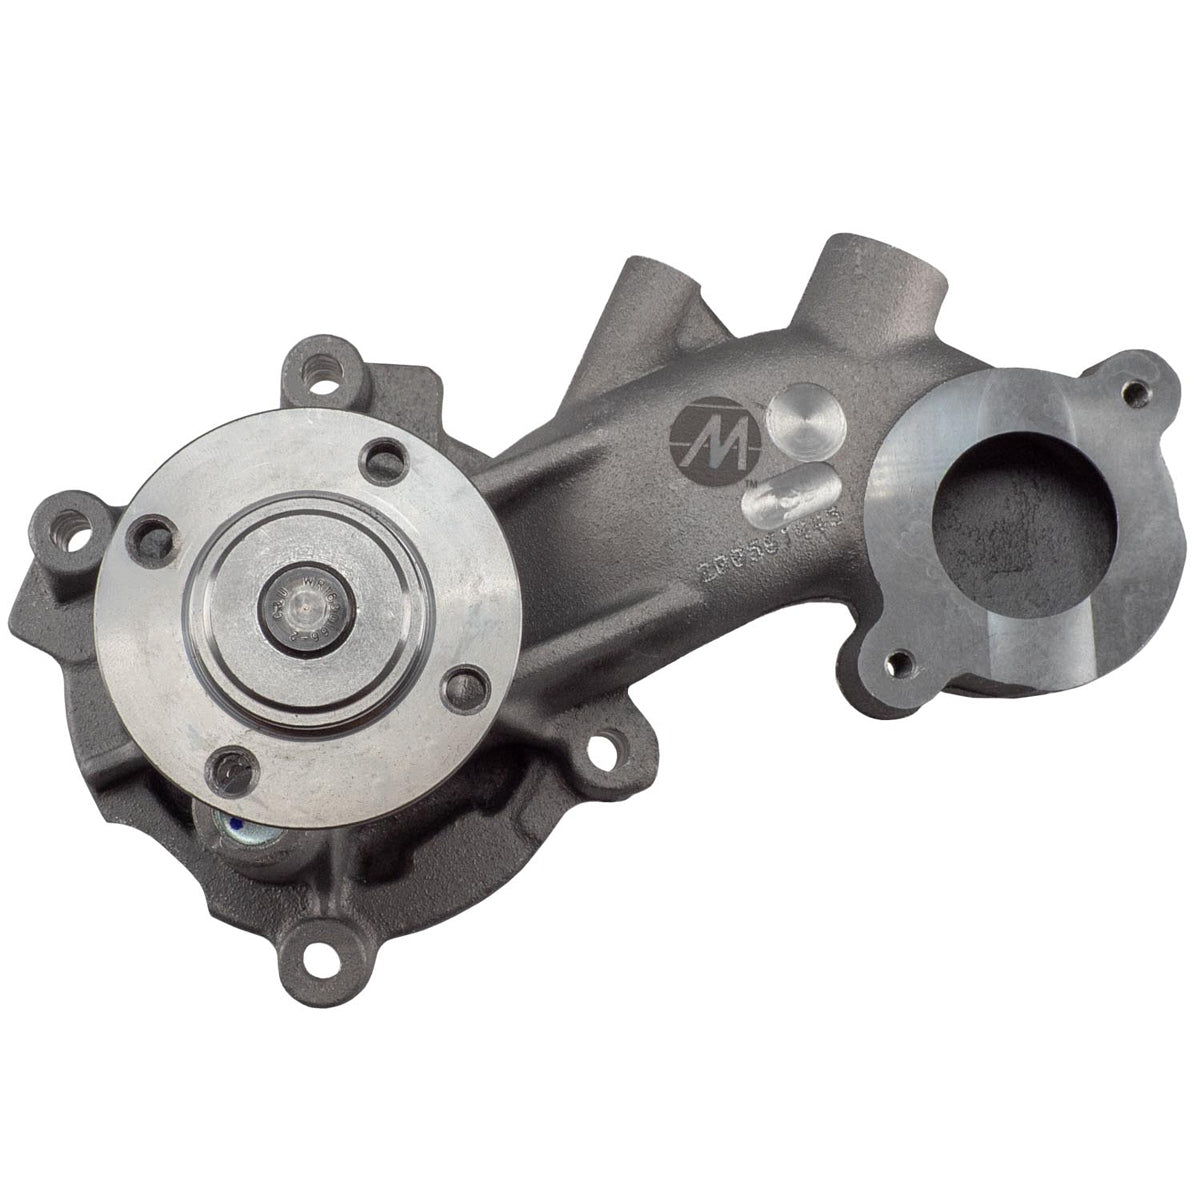 Water Pump - Ford 5.0L Mustang/F150 Truck